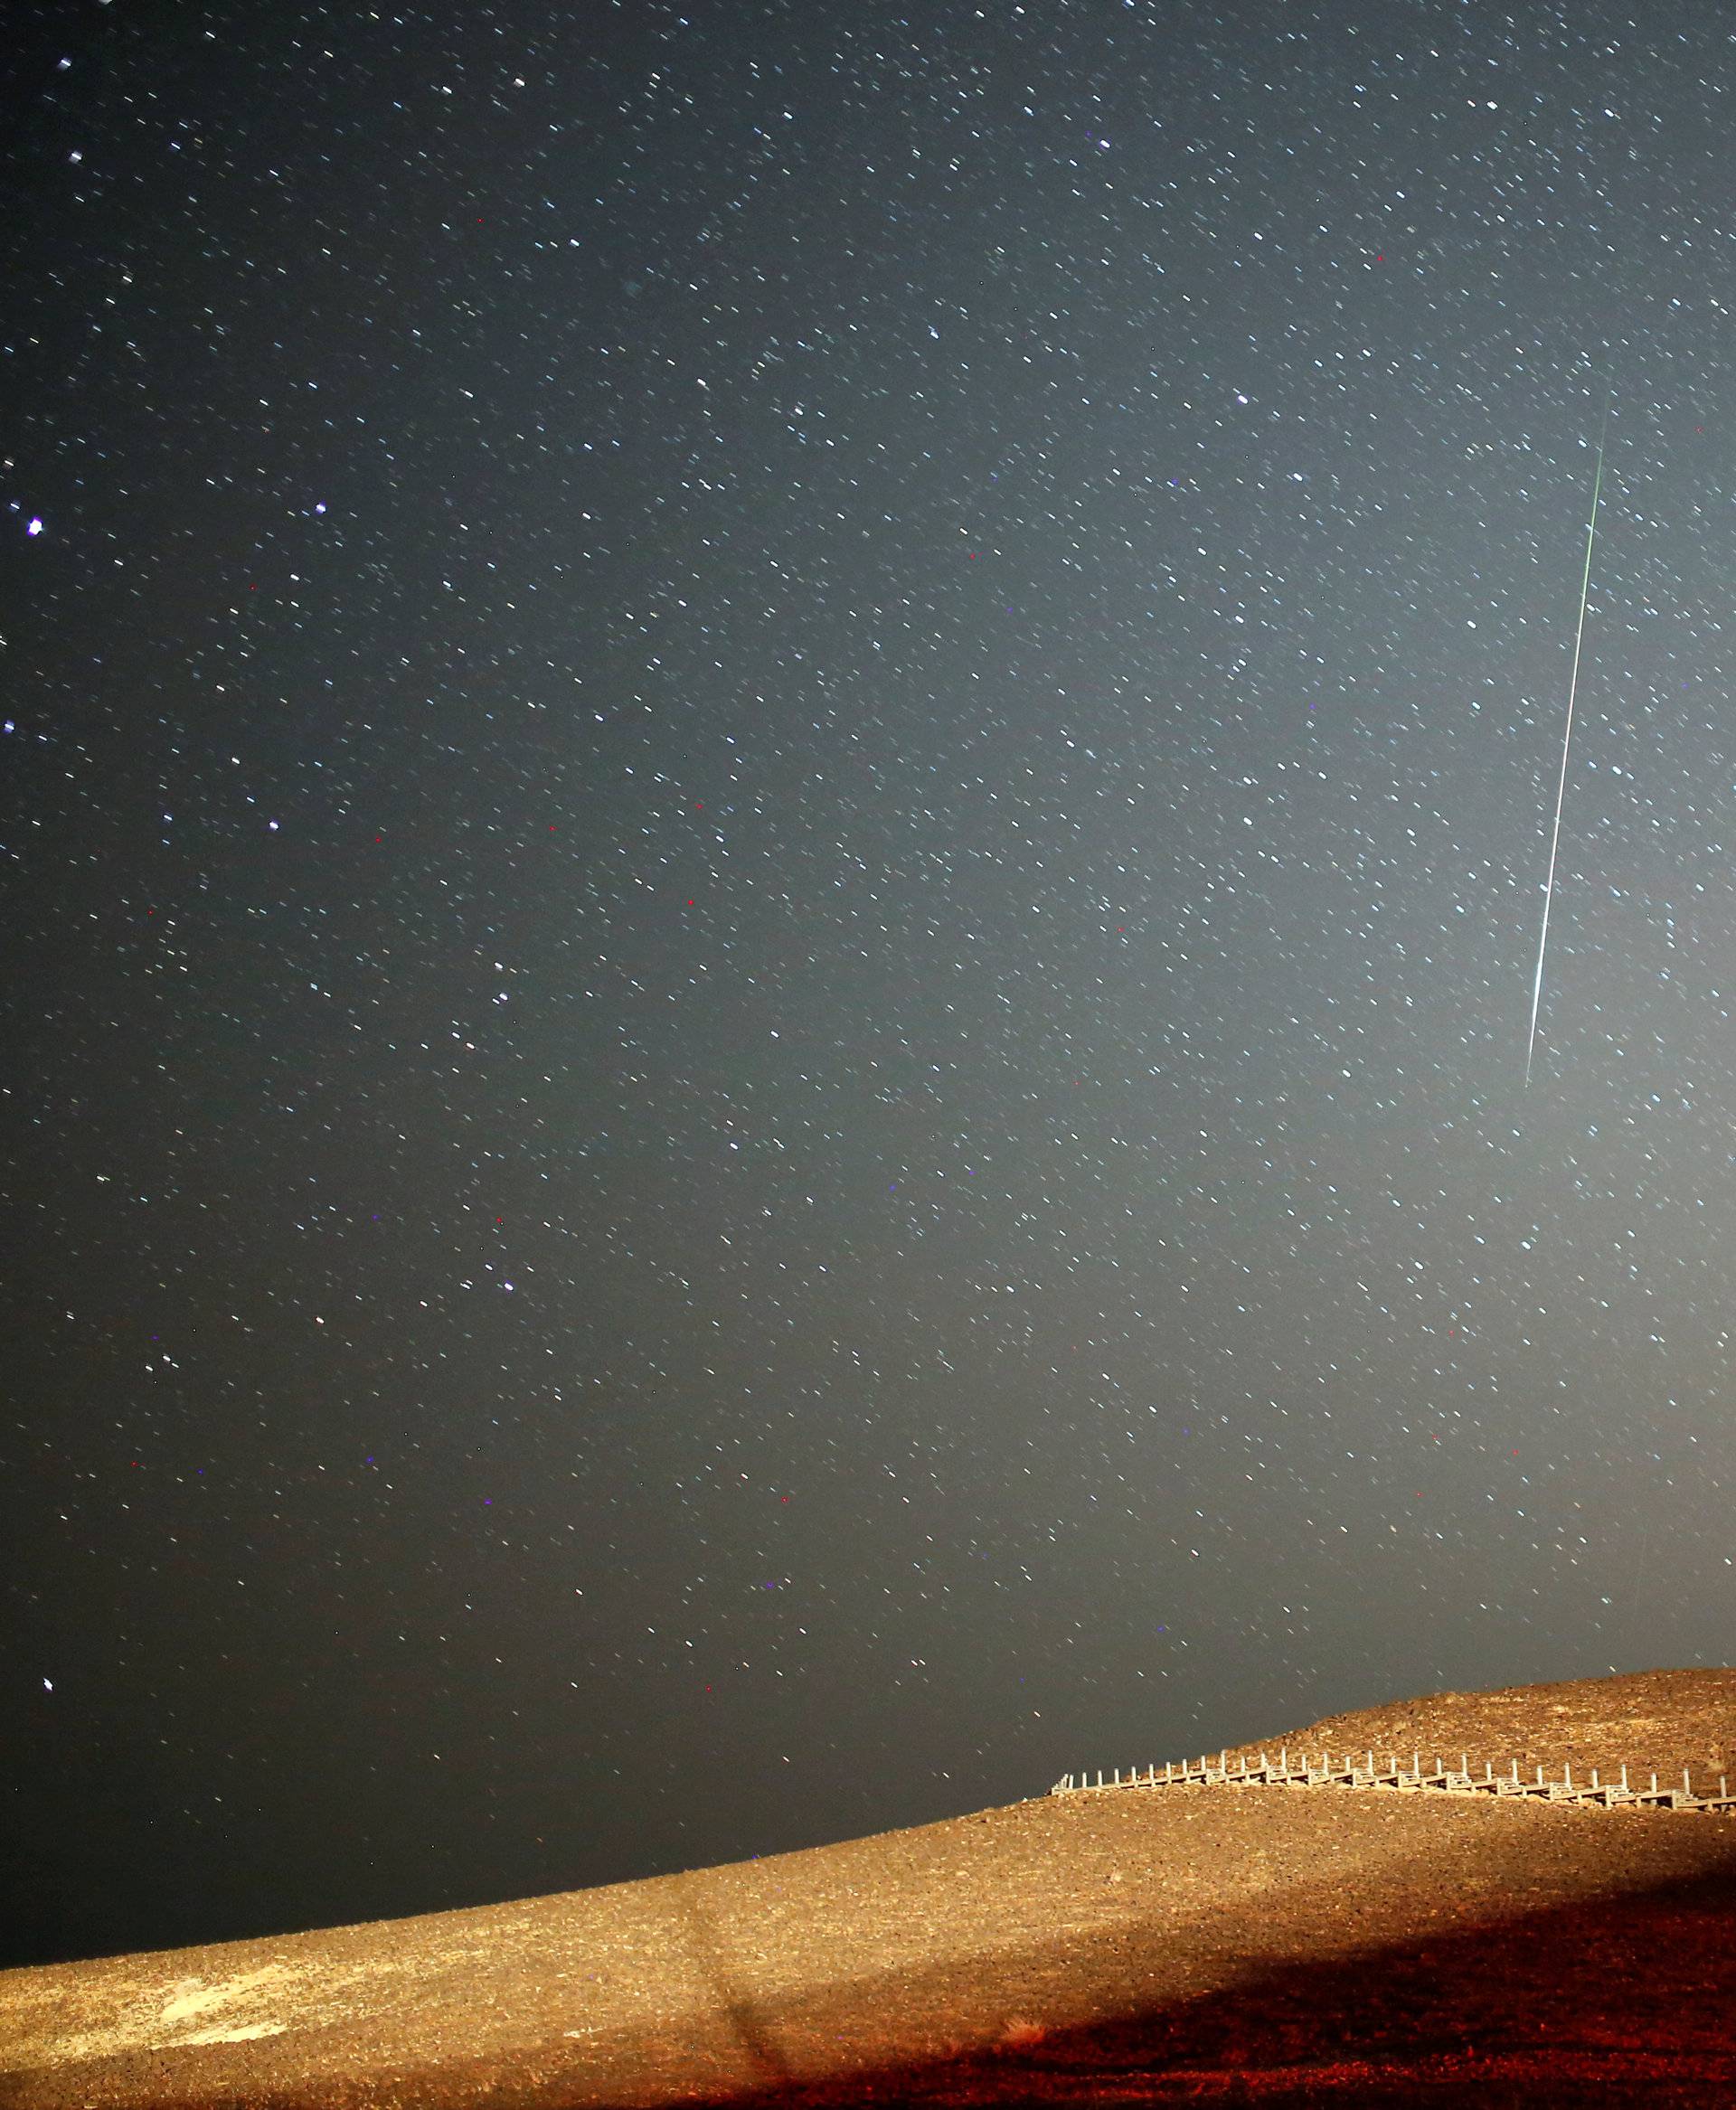 A meteor streaks across the sky in the early morning during the Perseid meteor shower in Ramon Crater near the town of Mitzpe Ramon